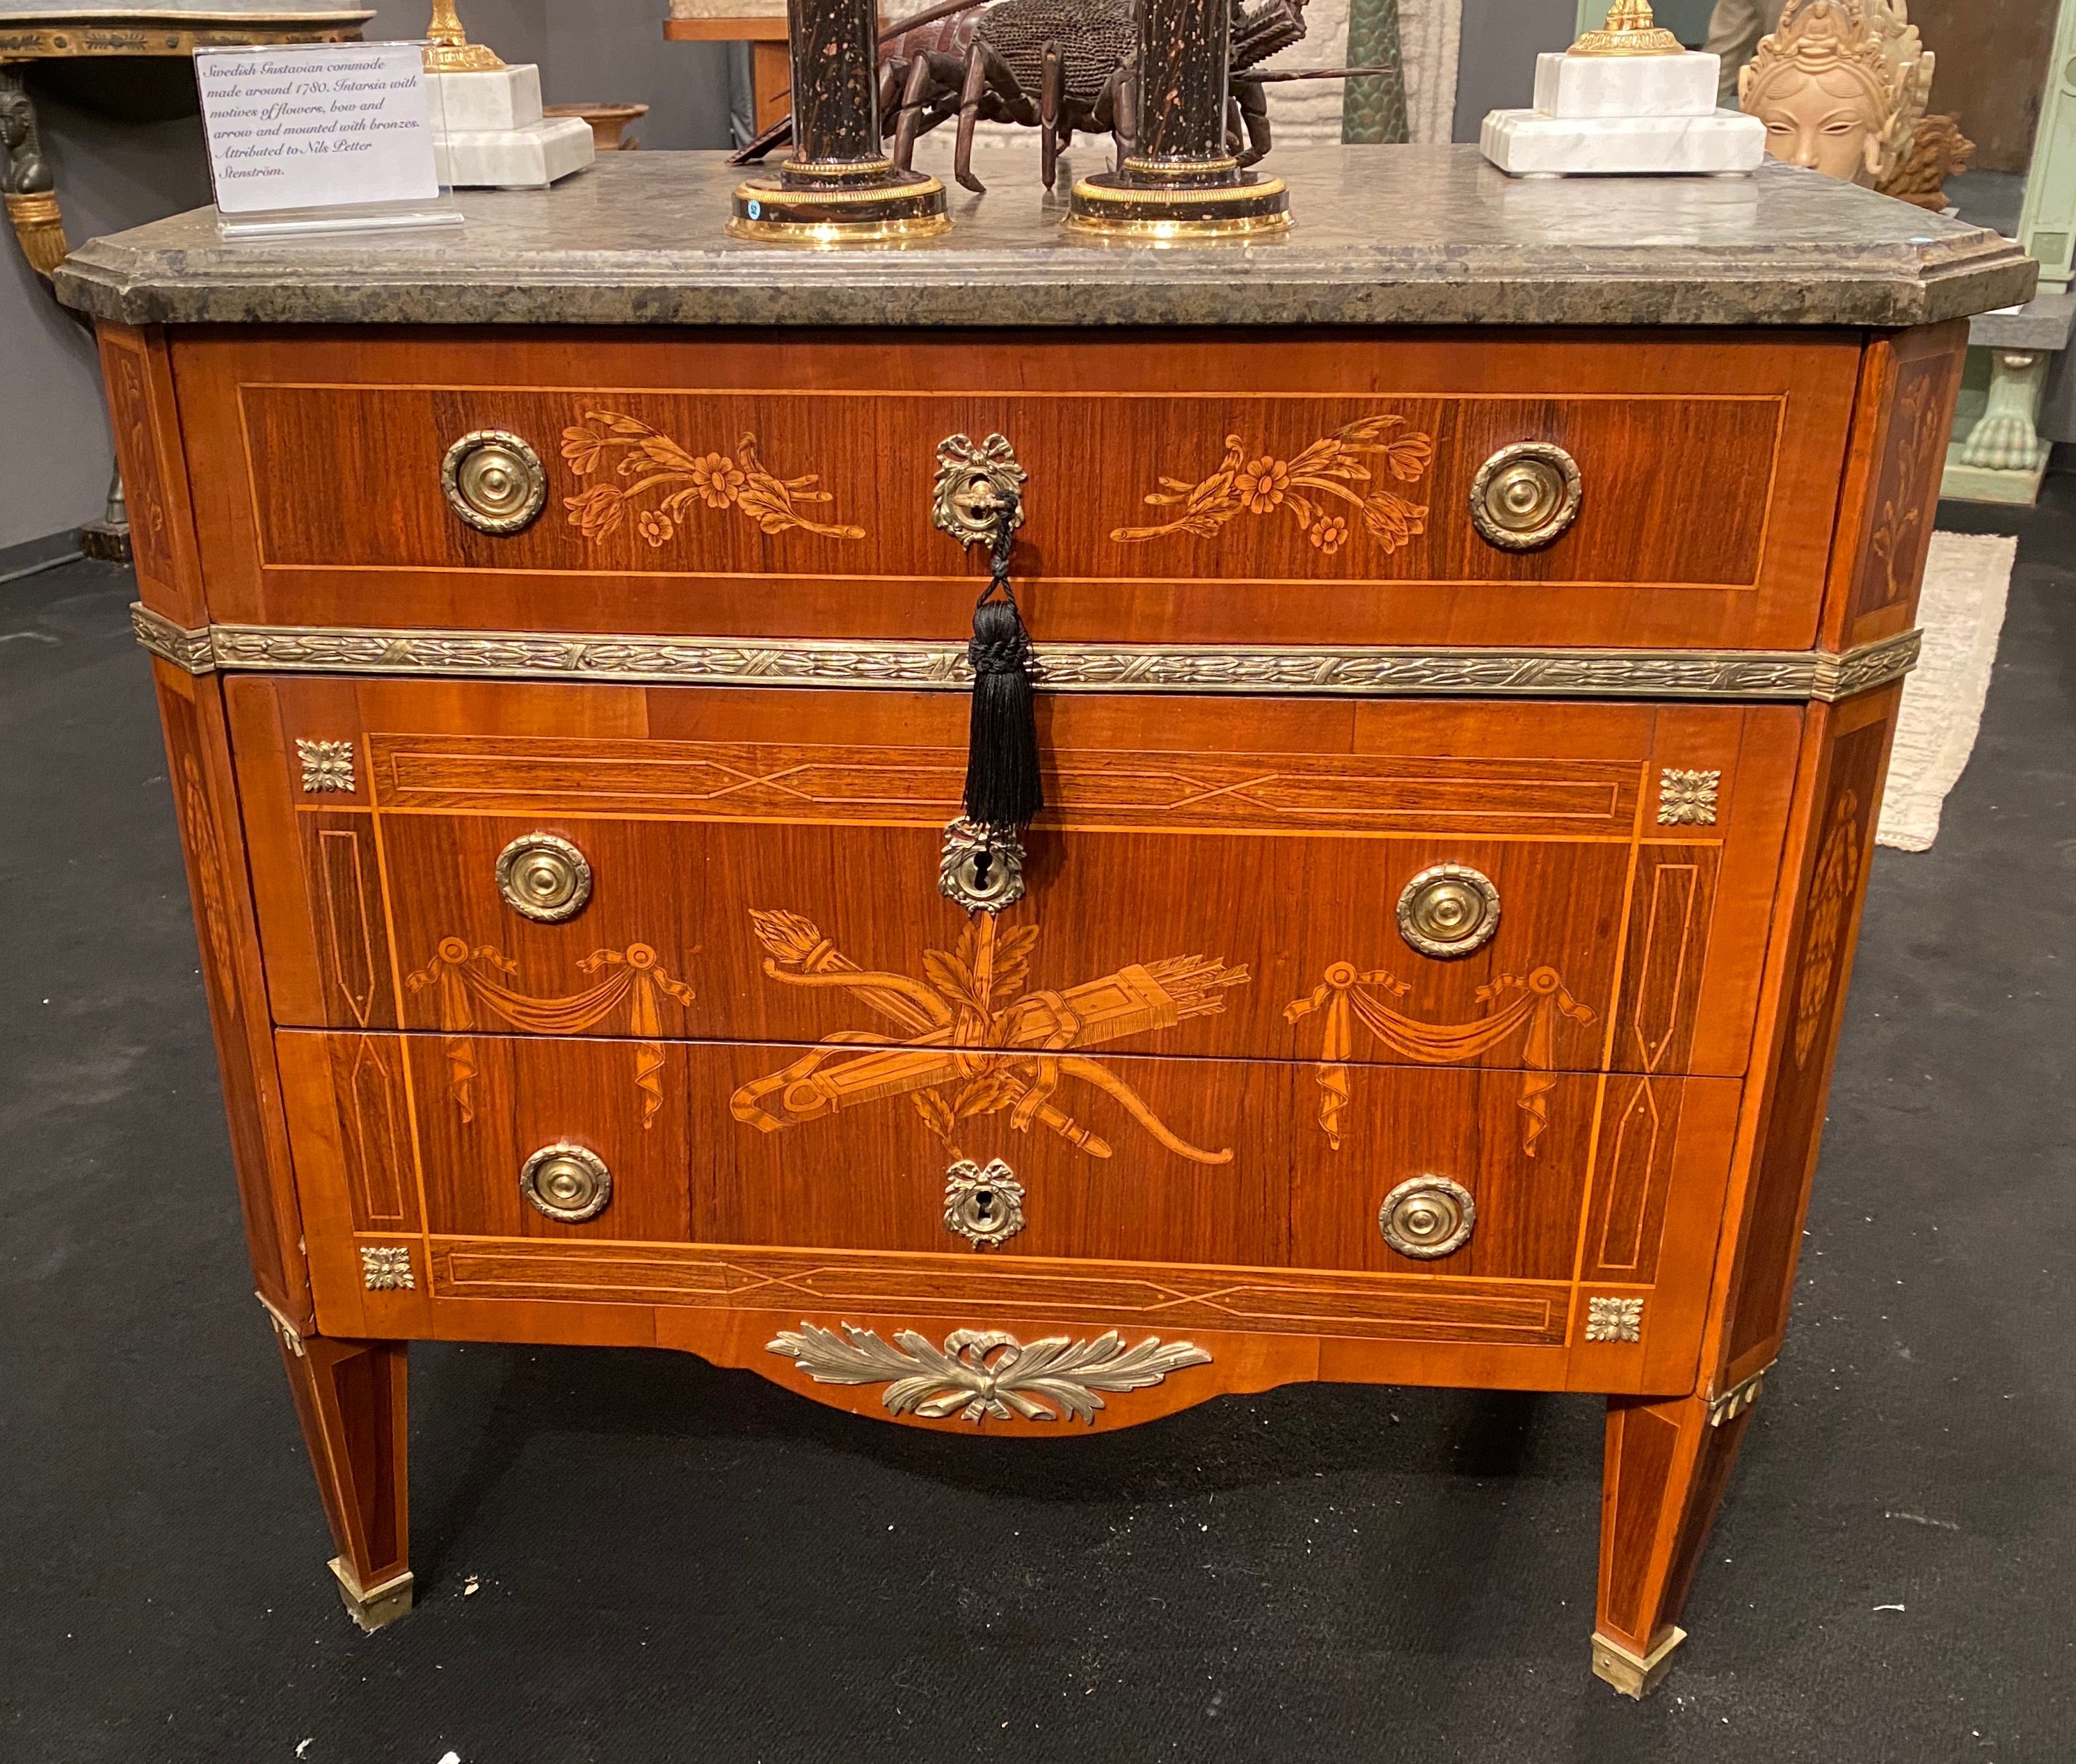 A Swedish Gustavian commode with a Swedish limestone top. Nice inlays in the shape of a bow and arrows, garlands and flowers. In Sweden most marble tops are made of limestone since they could be produced in the country. This top is unusually